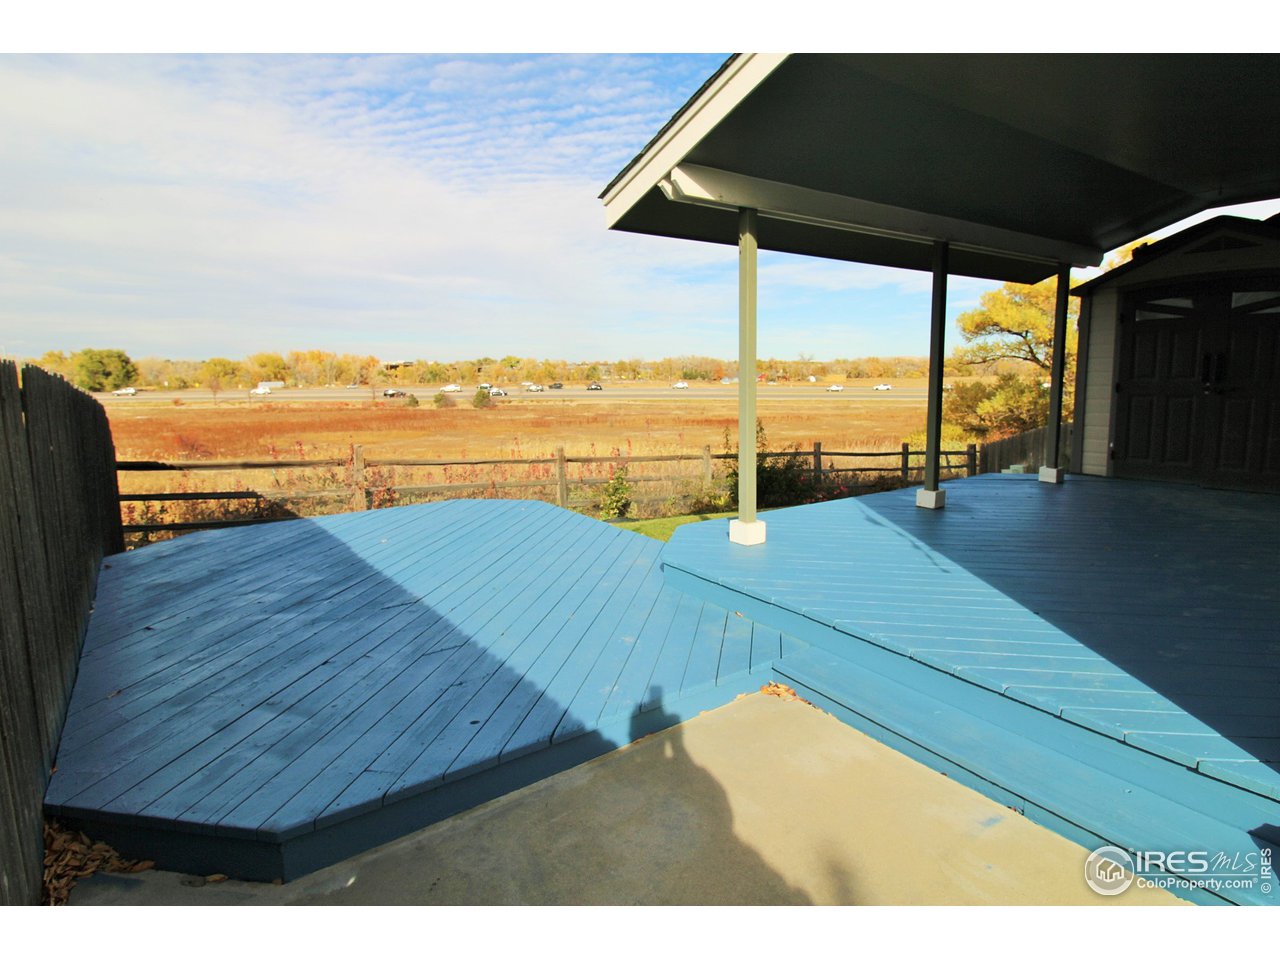 2-level deck + patio, Covered deck is 18' X 12', uncovered deck is 16' X 11'